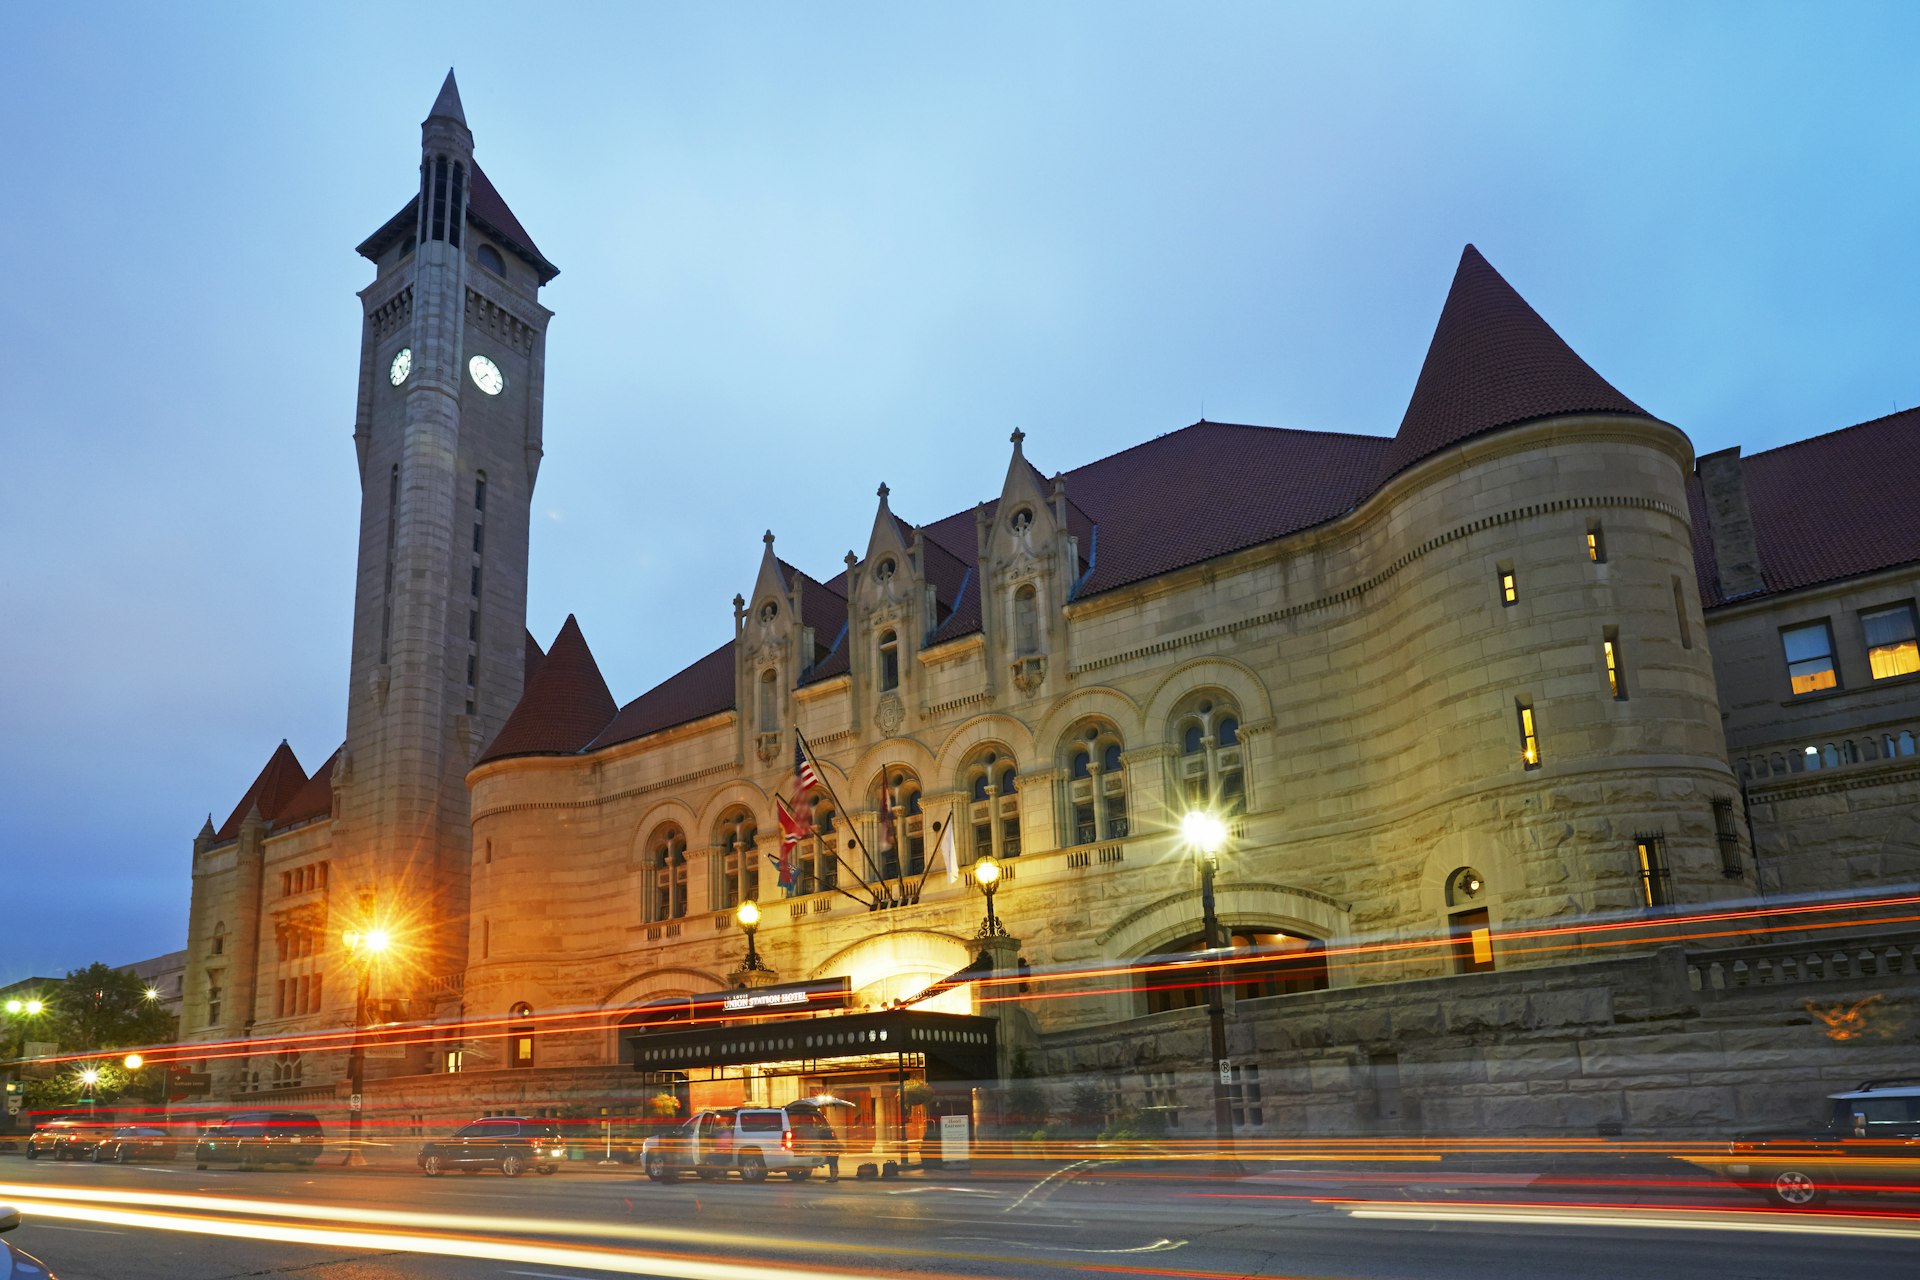 Facade of St Louis Union station at dusk